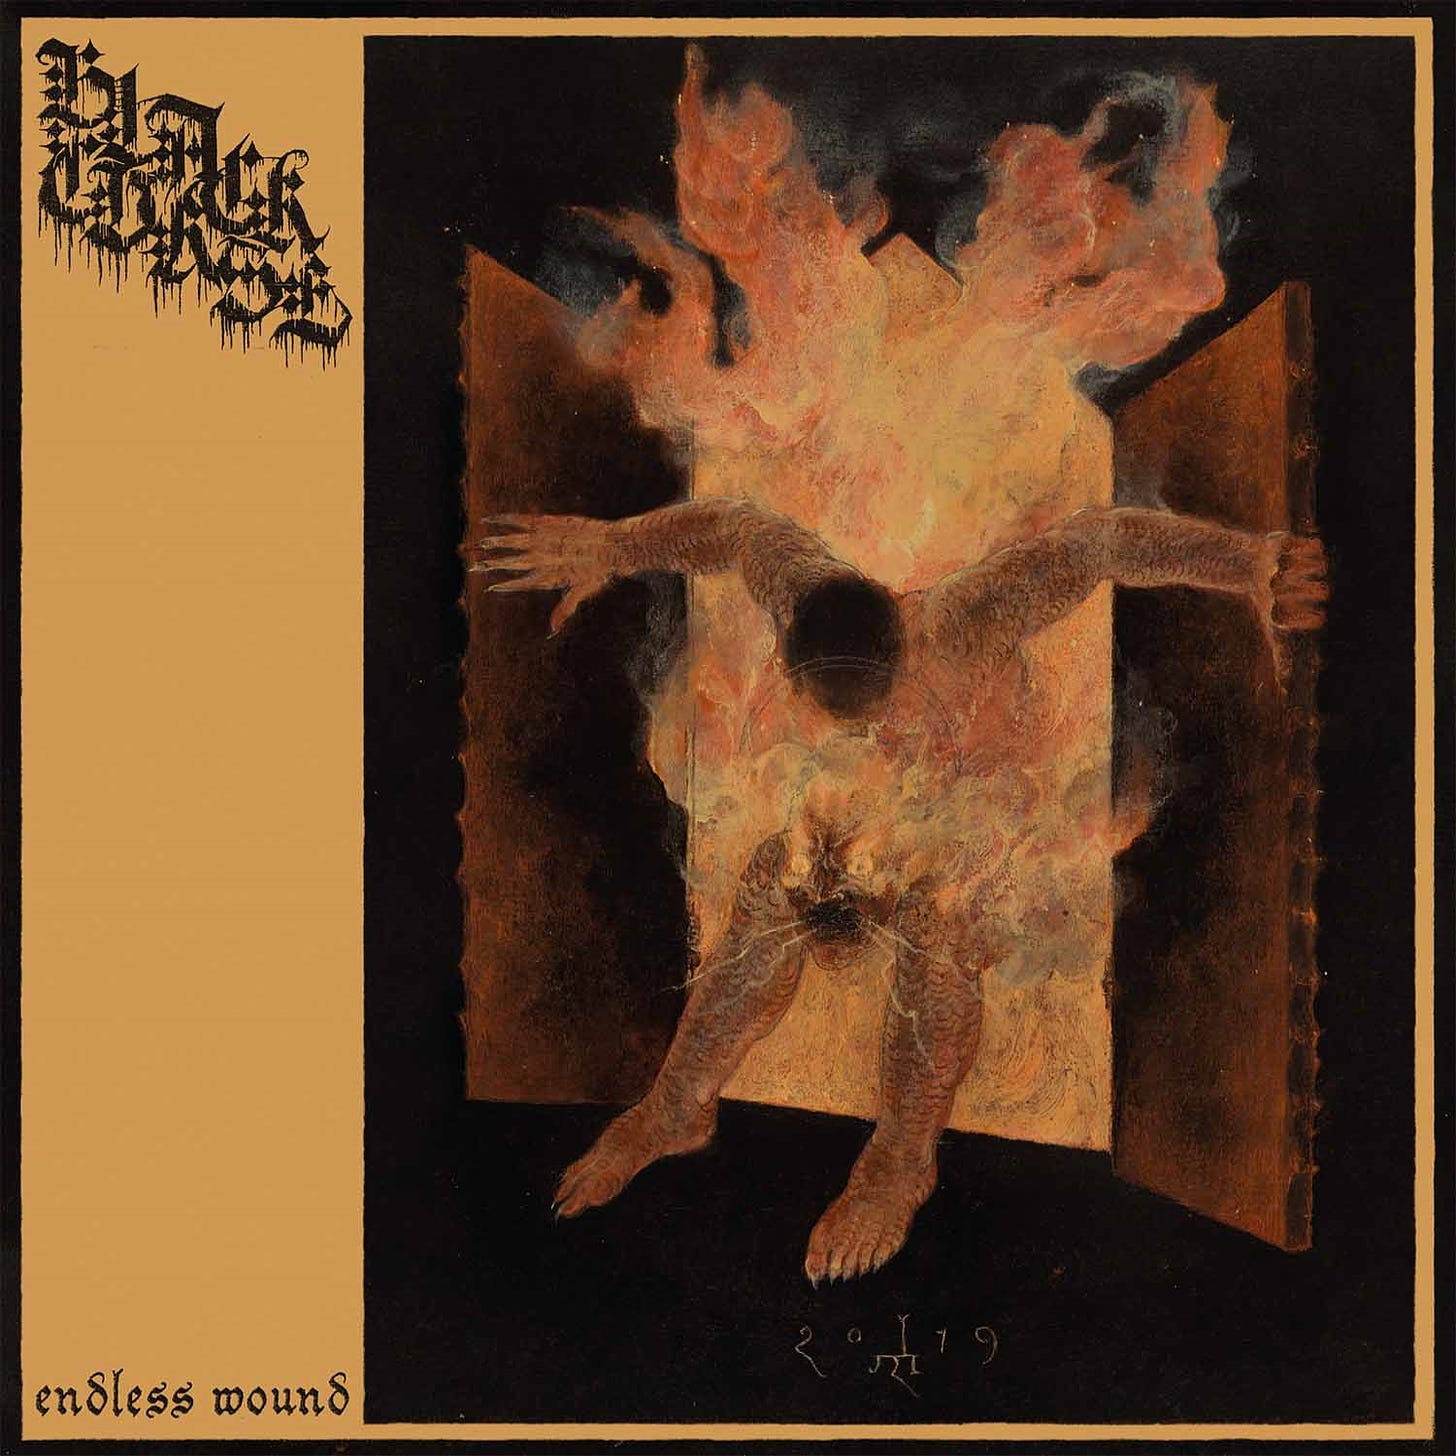 Endless Wound by Black Curse